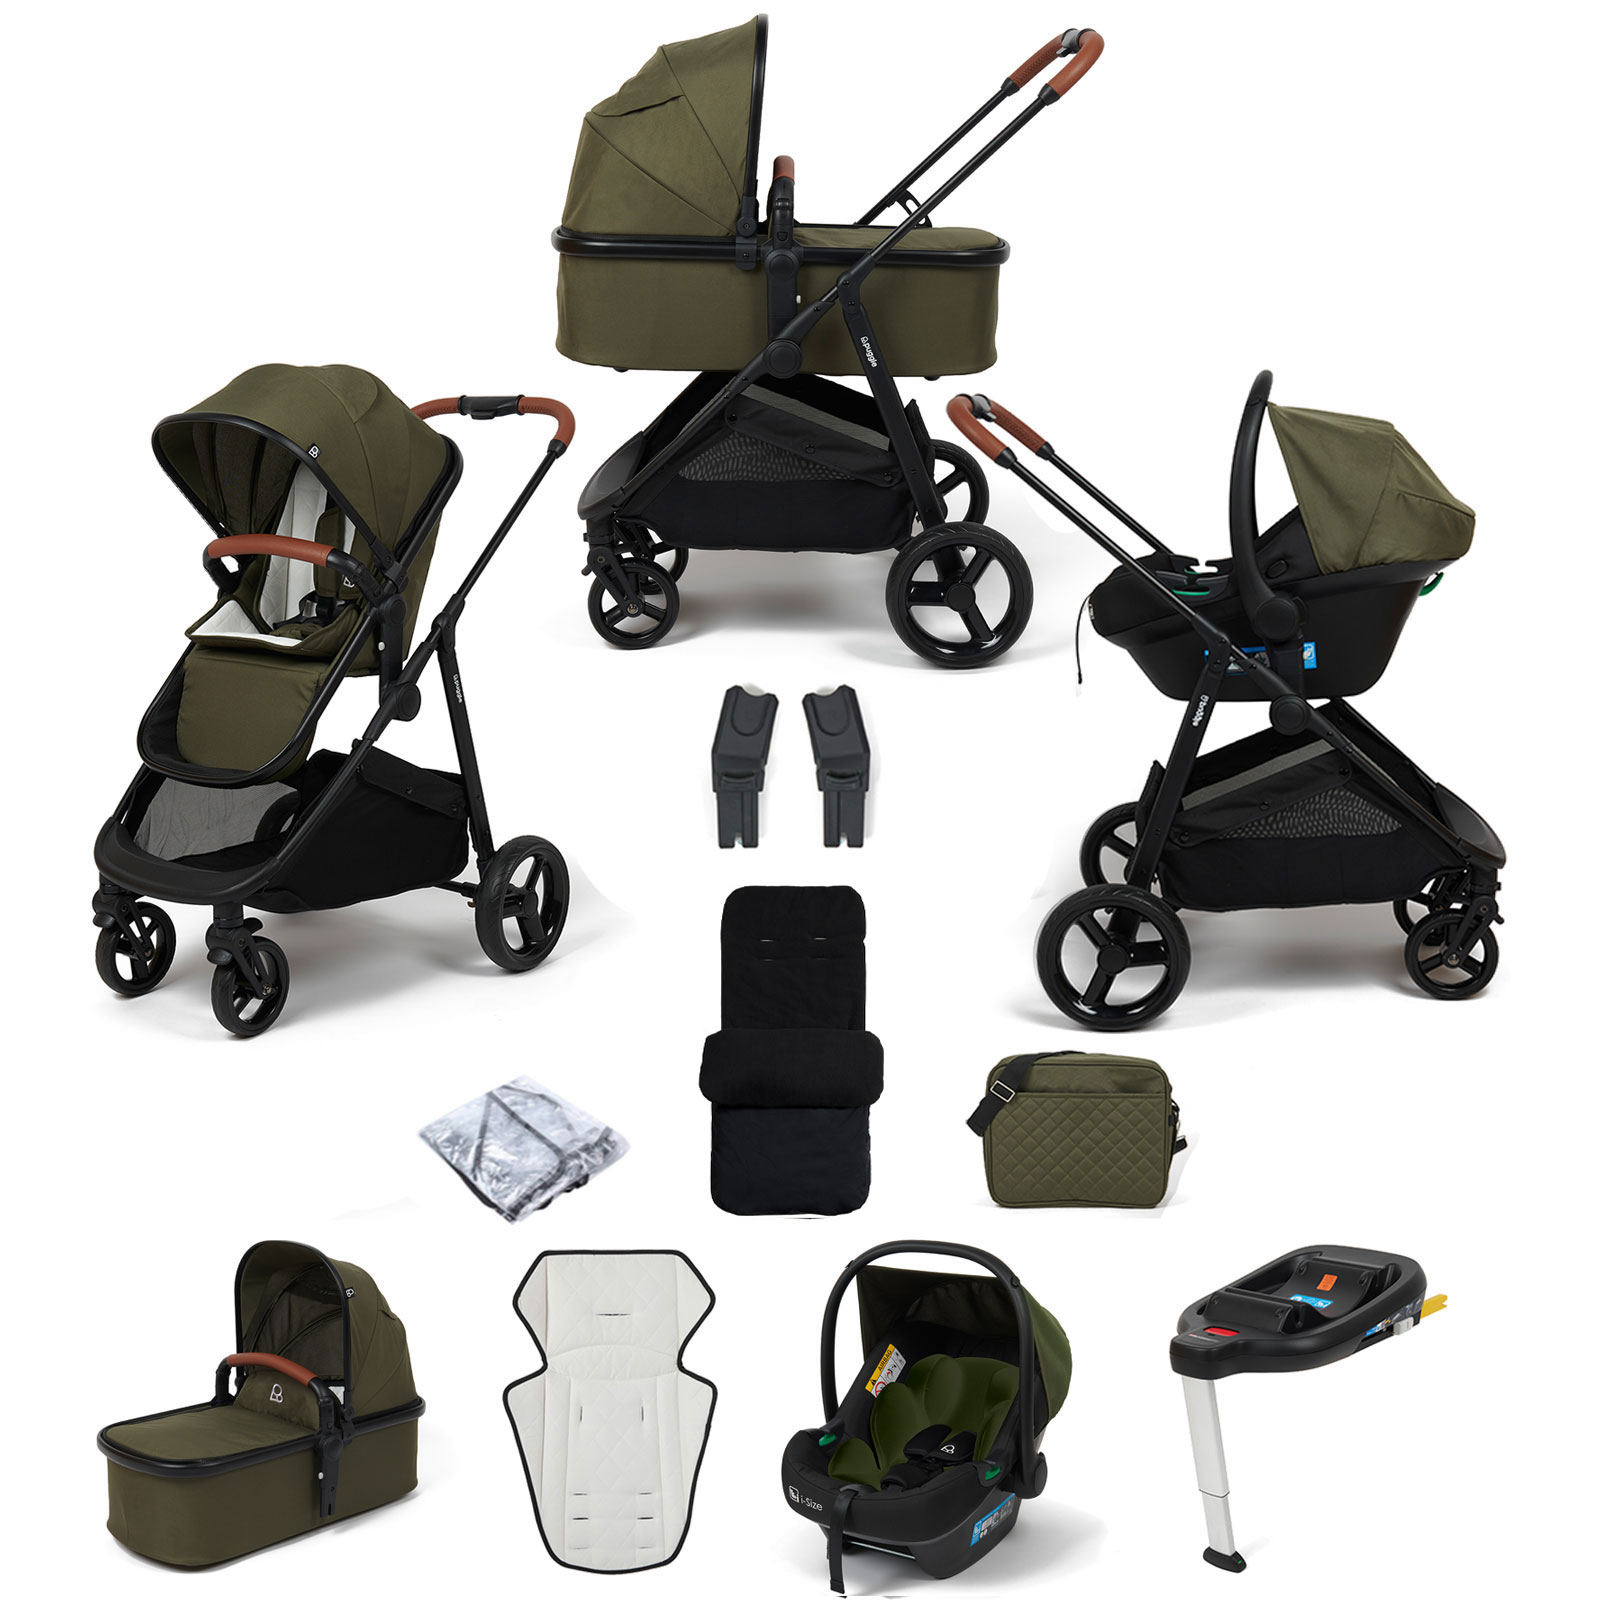 Puggle Monaco XT 3in1 i-Size Travel System with Changing Bag, Deluxe Footmuff & ISOFIX Base - Forest Green